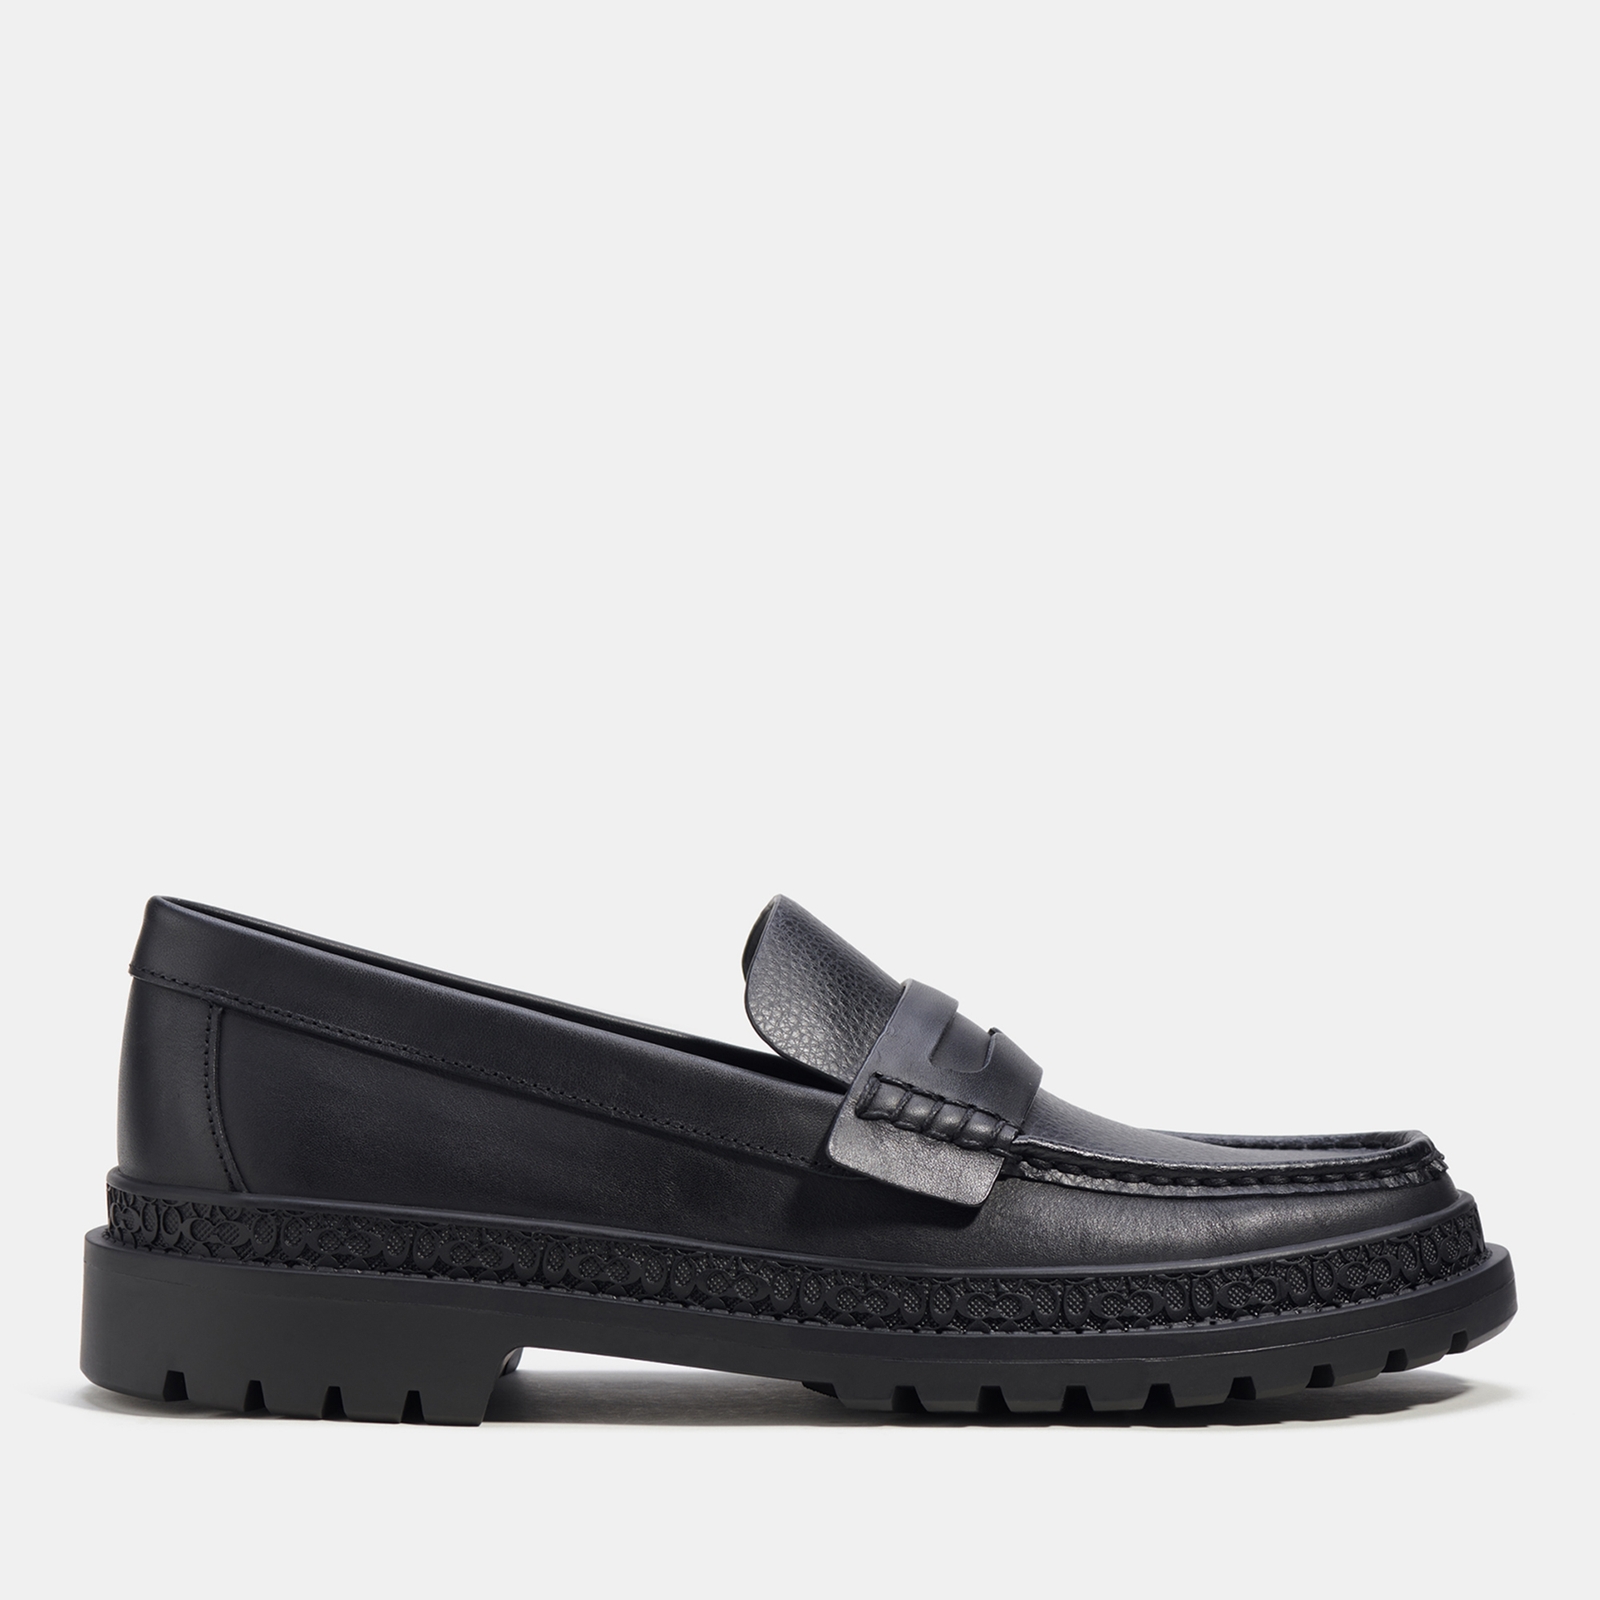 Coach Men’s Cooper Leather Penny Loafers